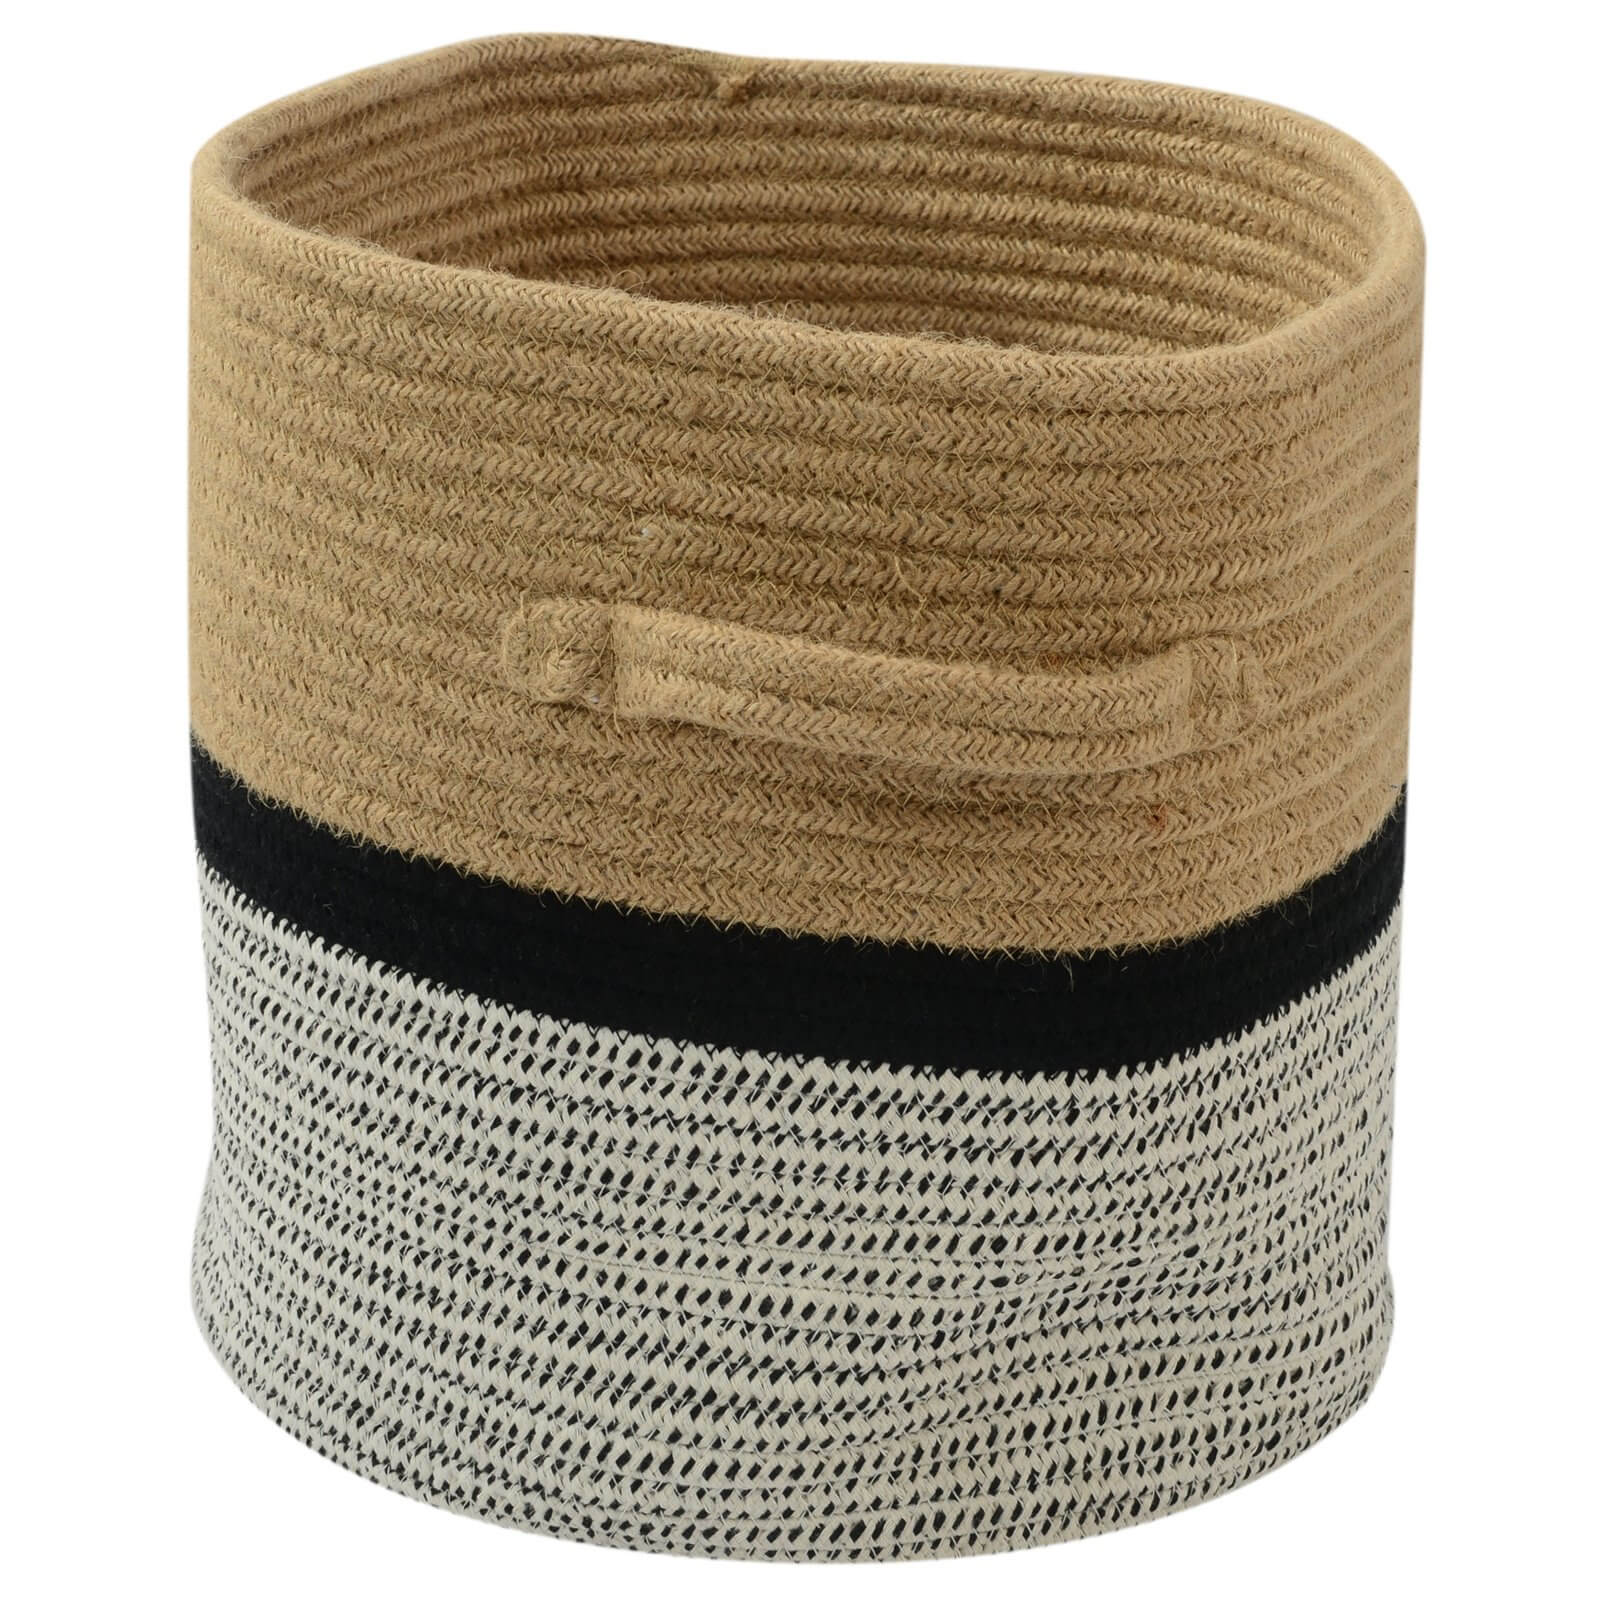 Clever Cube Rope Insert - Natural, Black & Grey